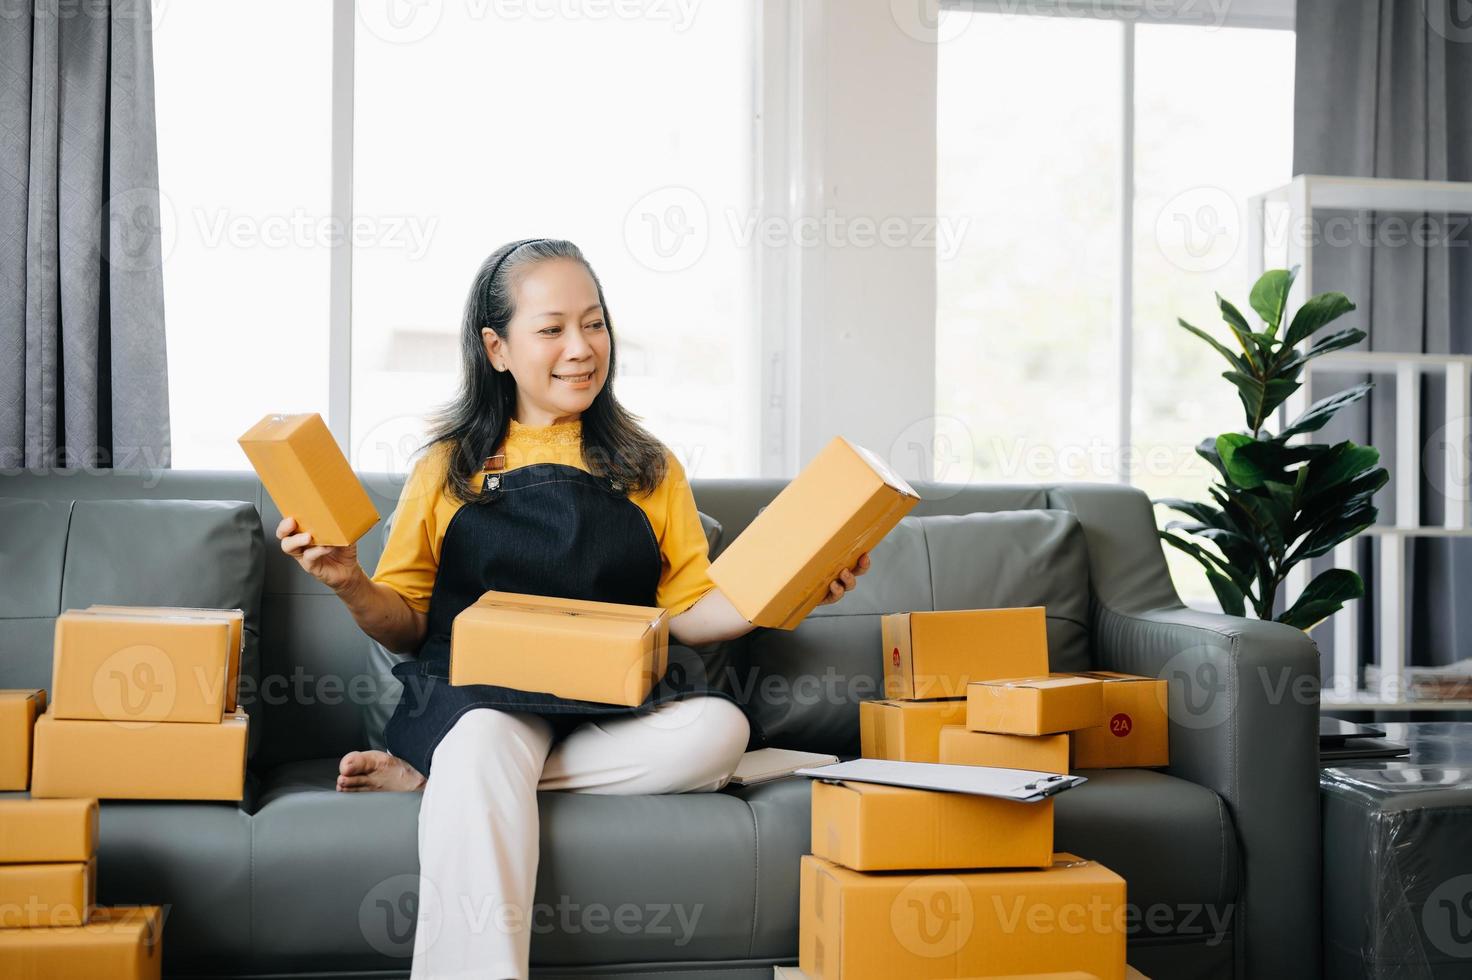 Startup small business SME, Entrepreneur owner Senior woman using smartphone or tablet taking receive and checking online purchase shopping order to preparing pack product box. photo